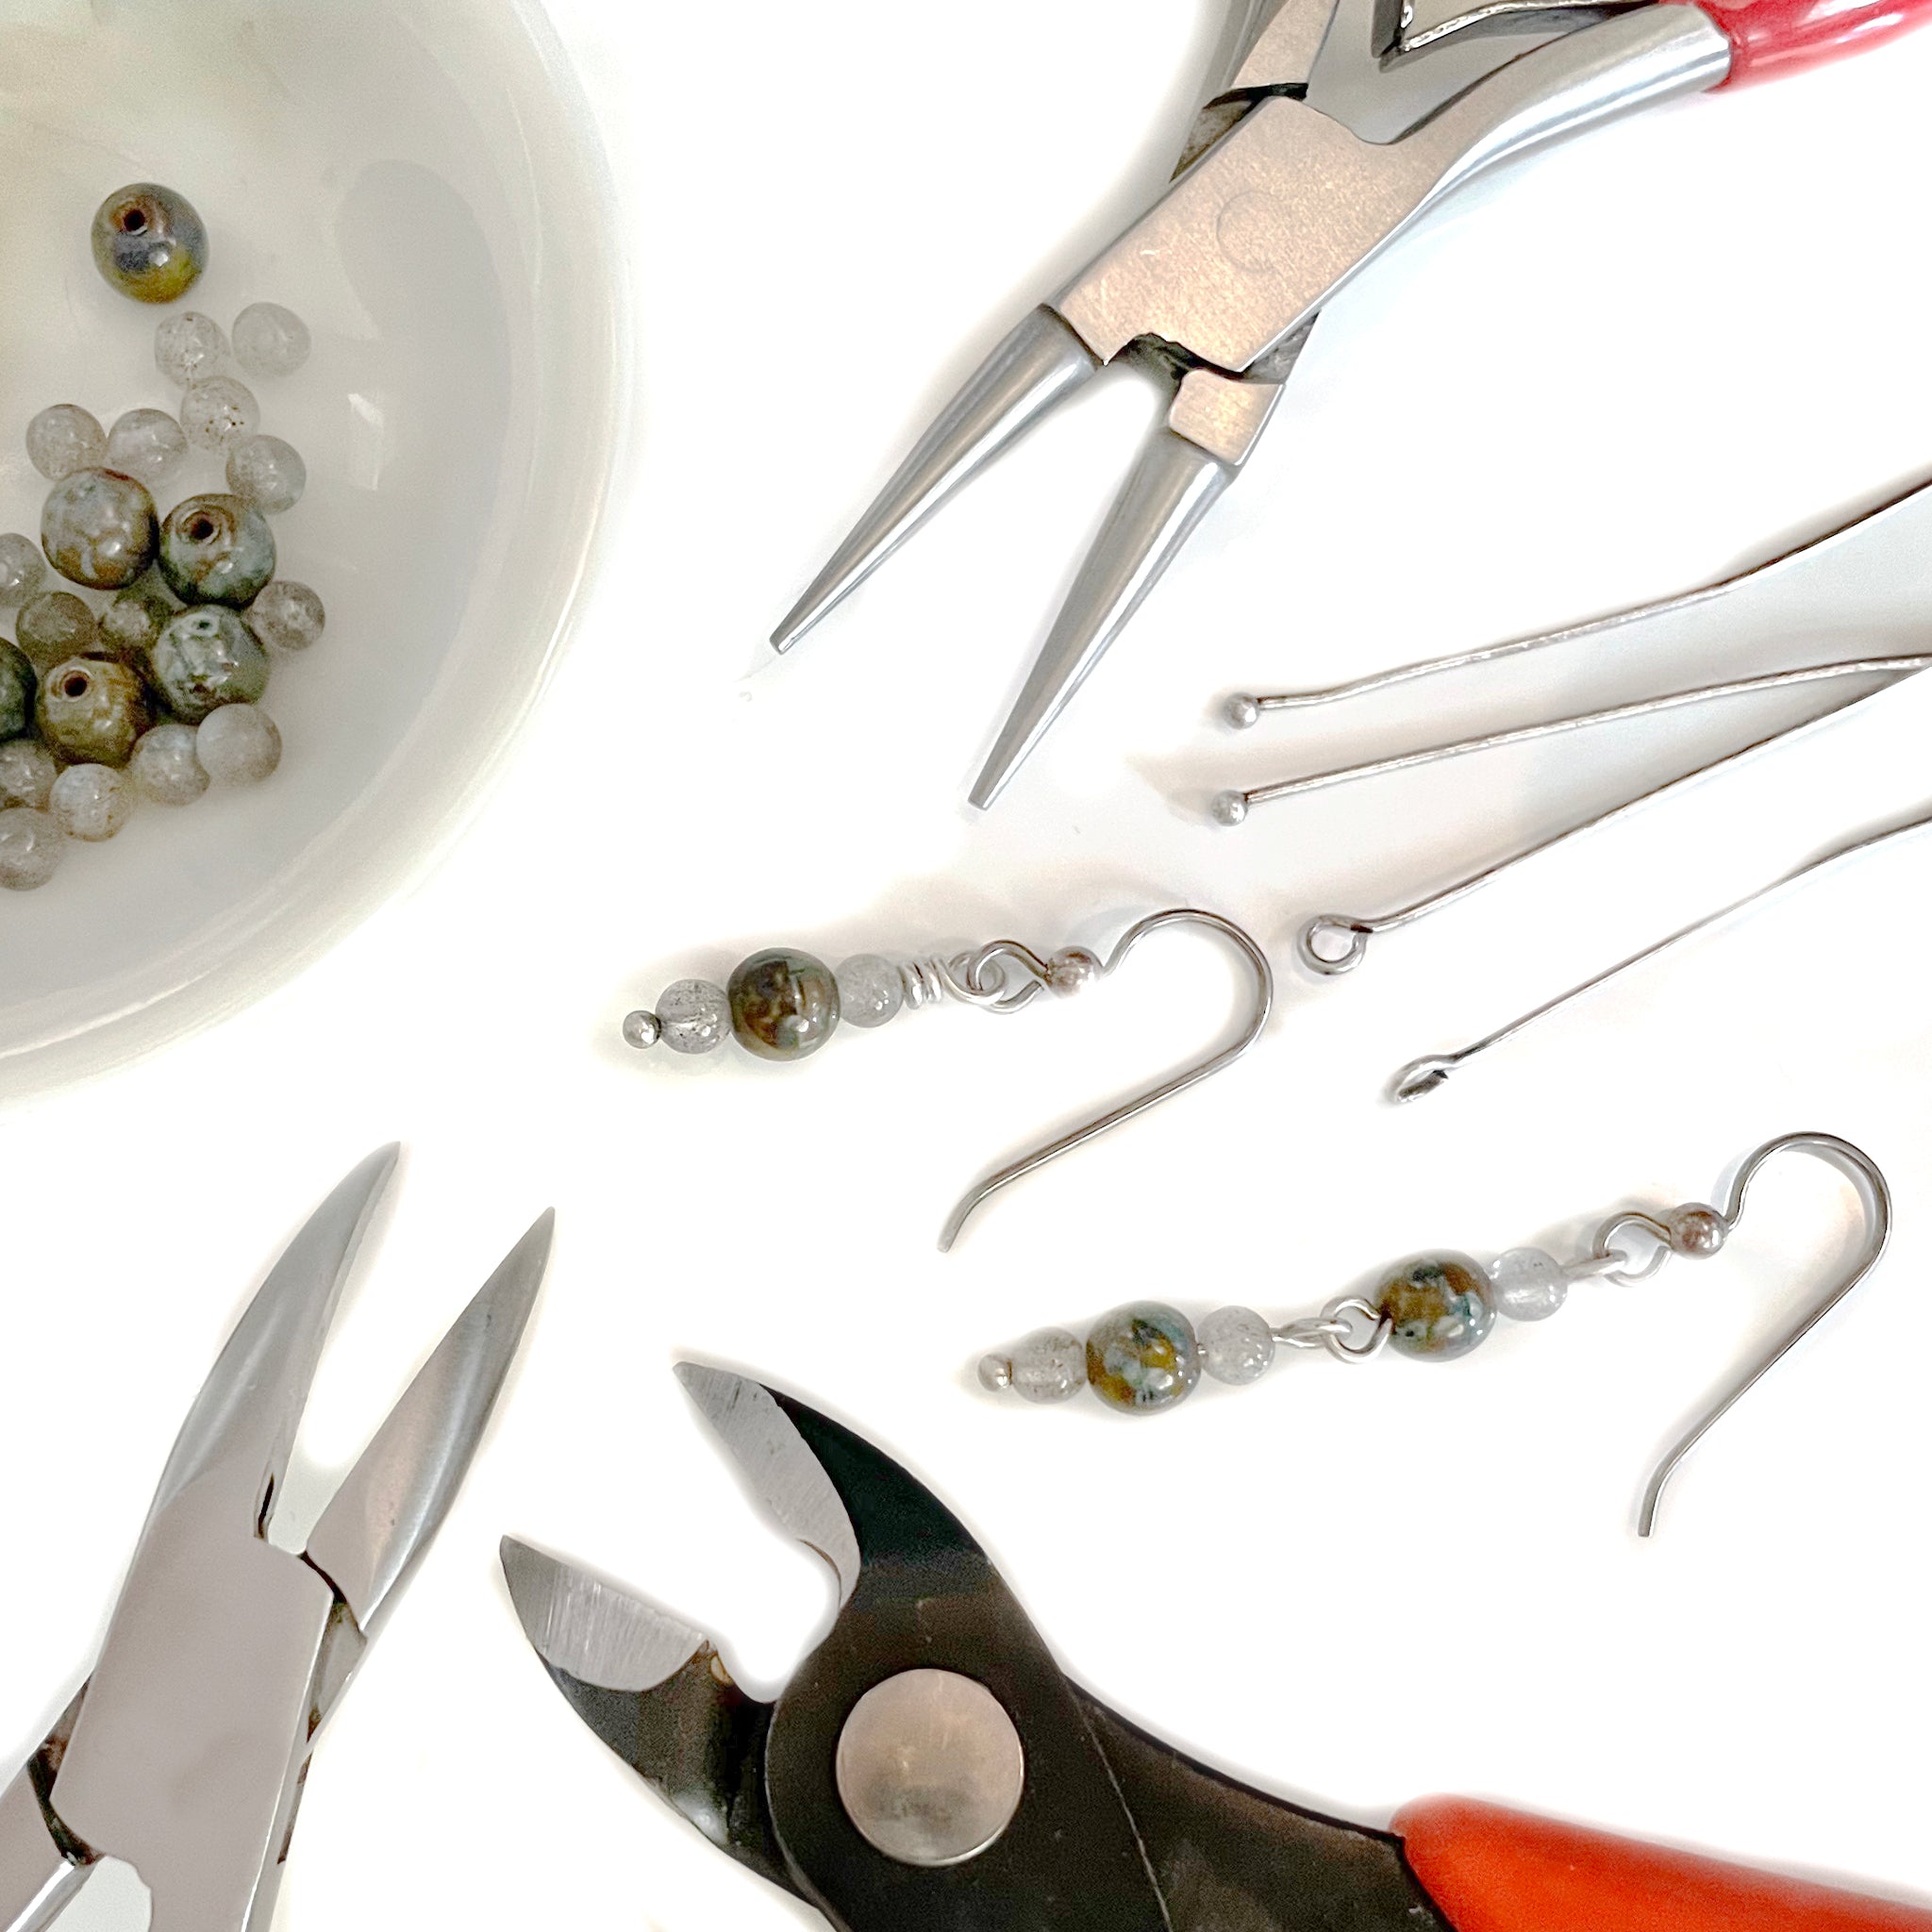 Wire jewelry making - the tools you need to start wire wrapping